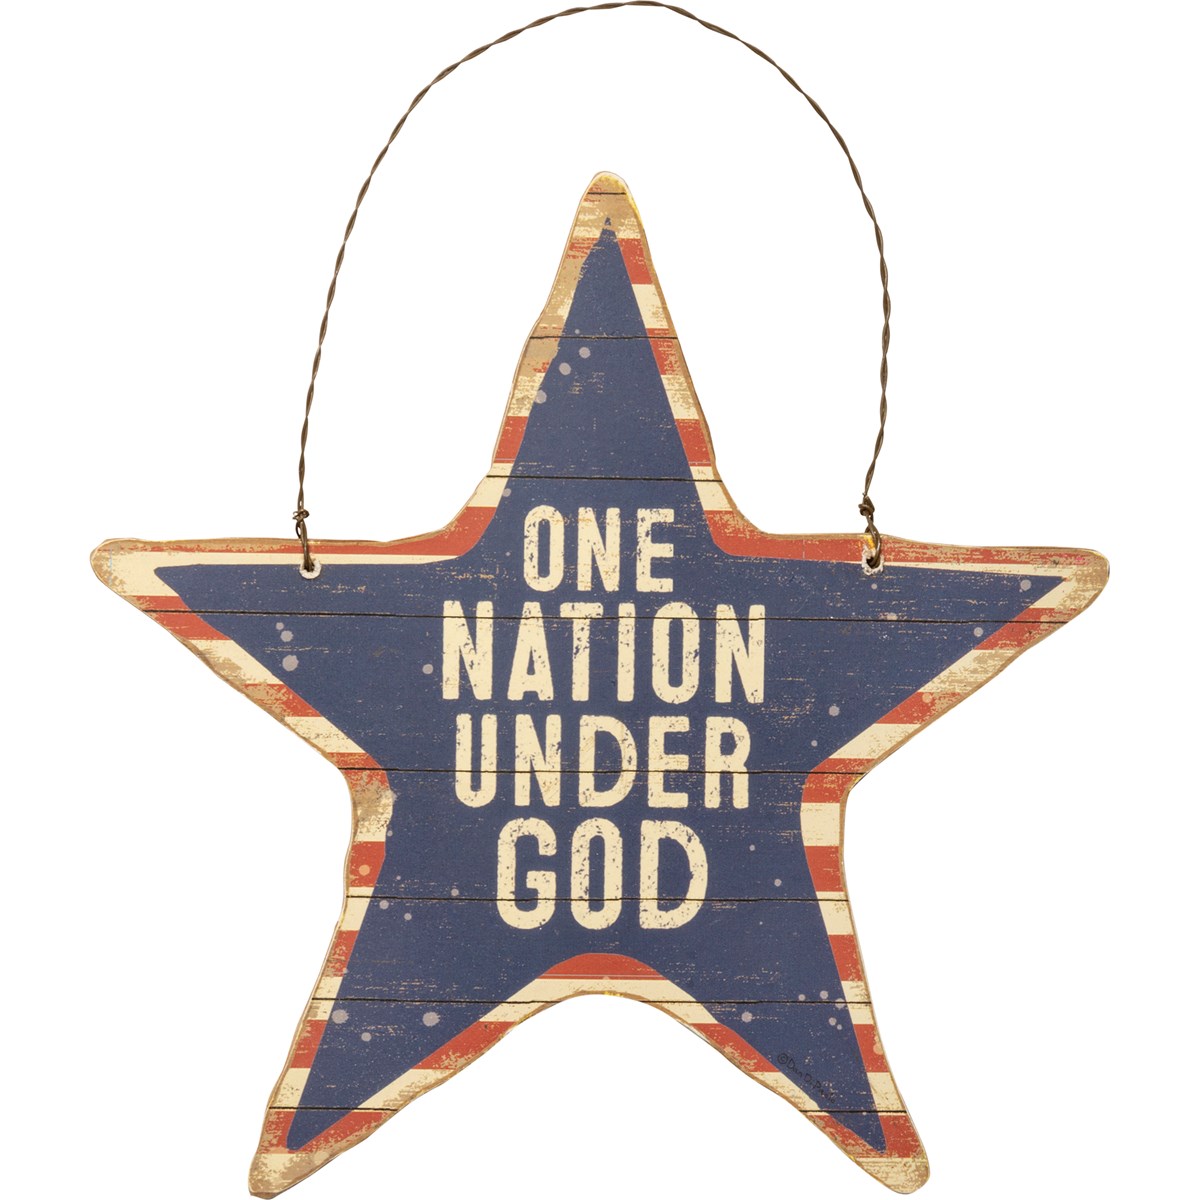 One Nation Under God Hanging Decor - Wood, Paper, Wire